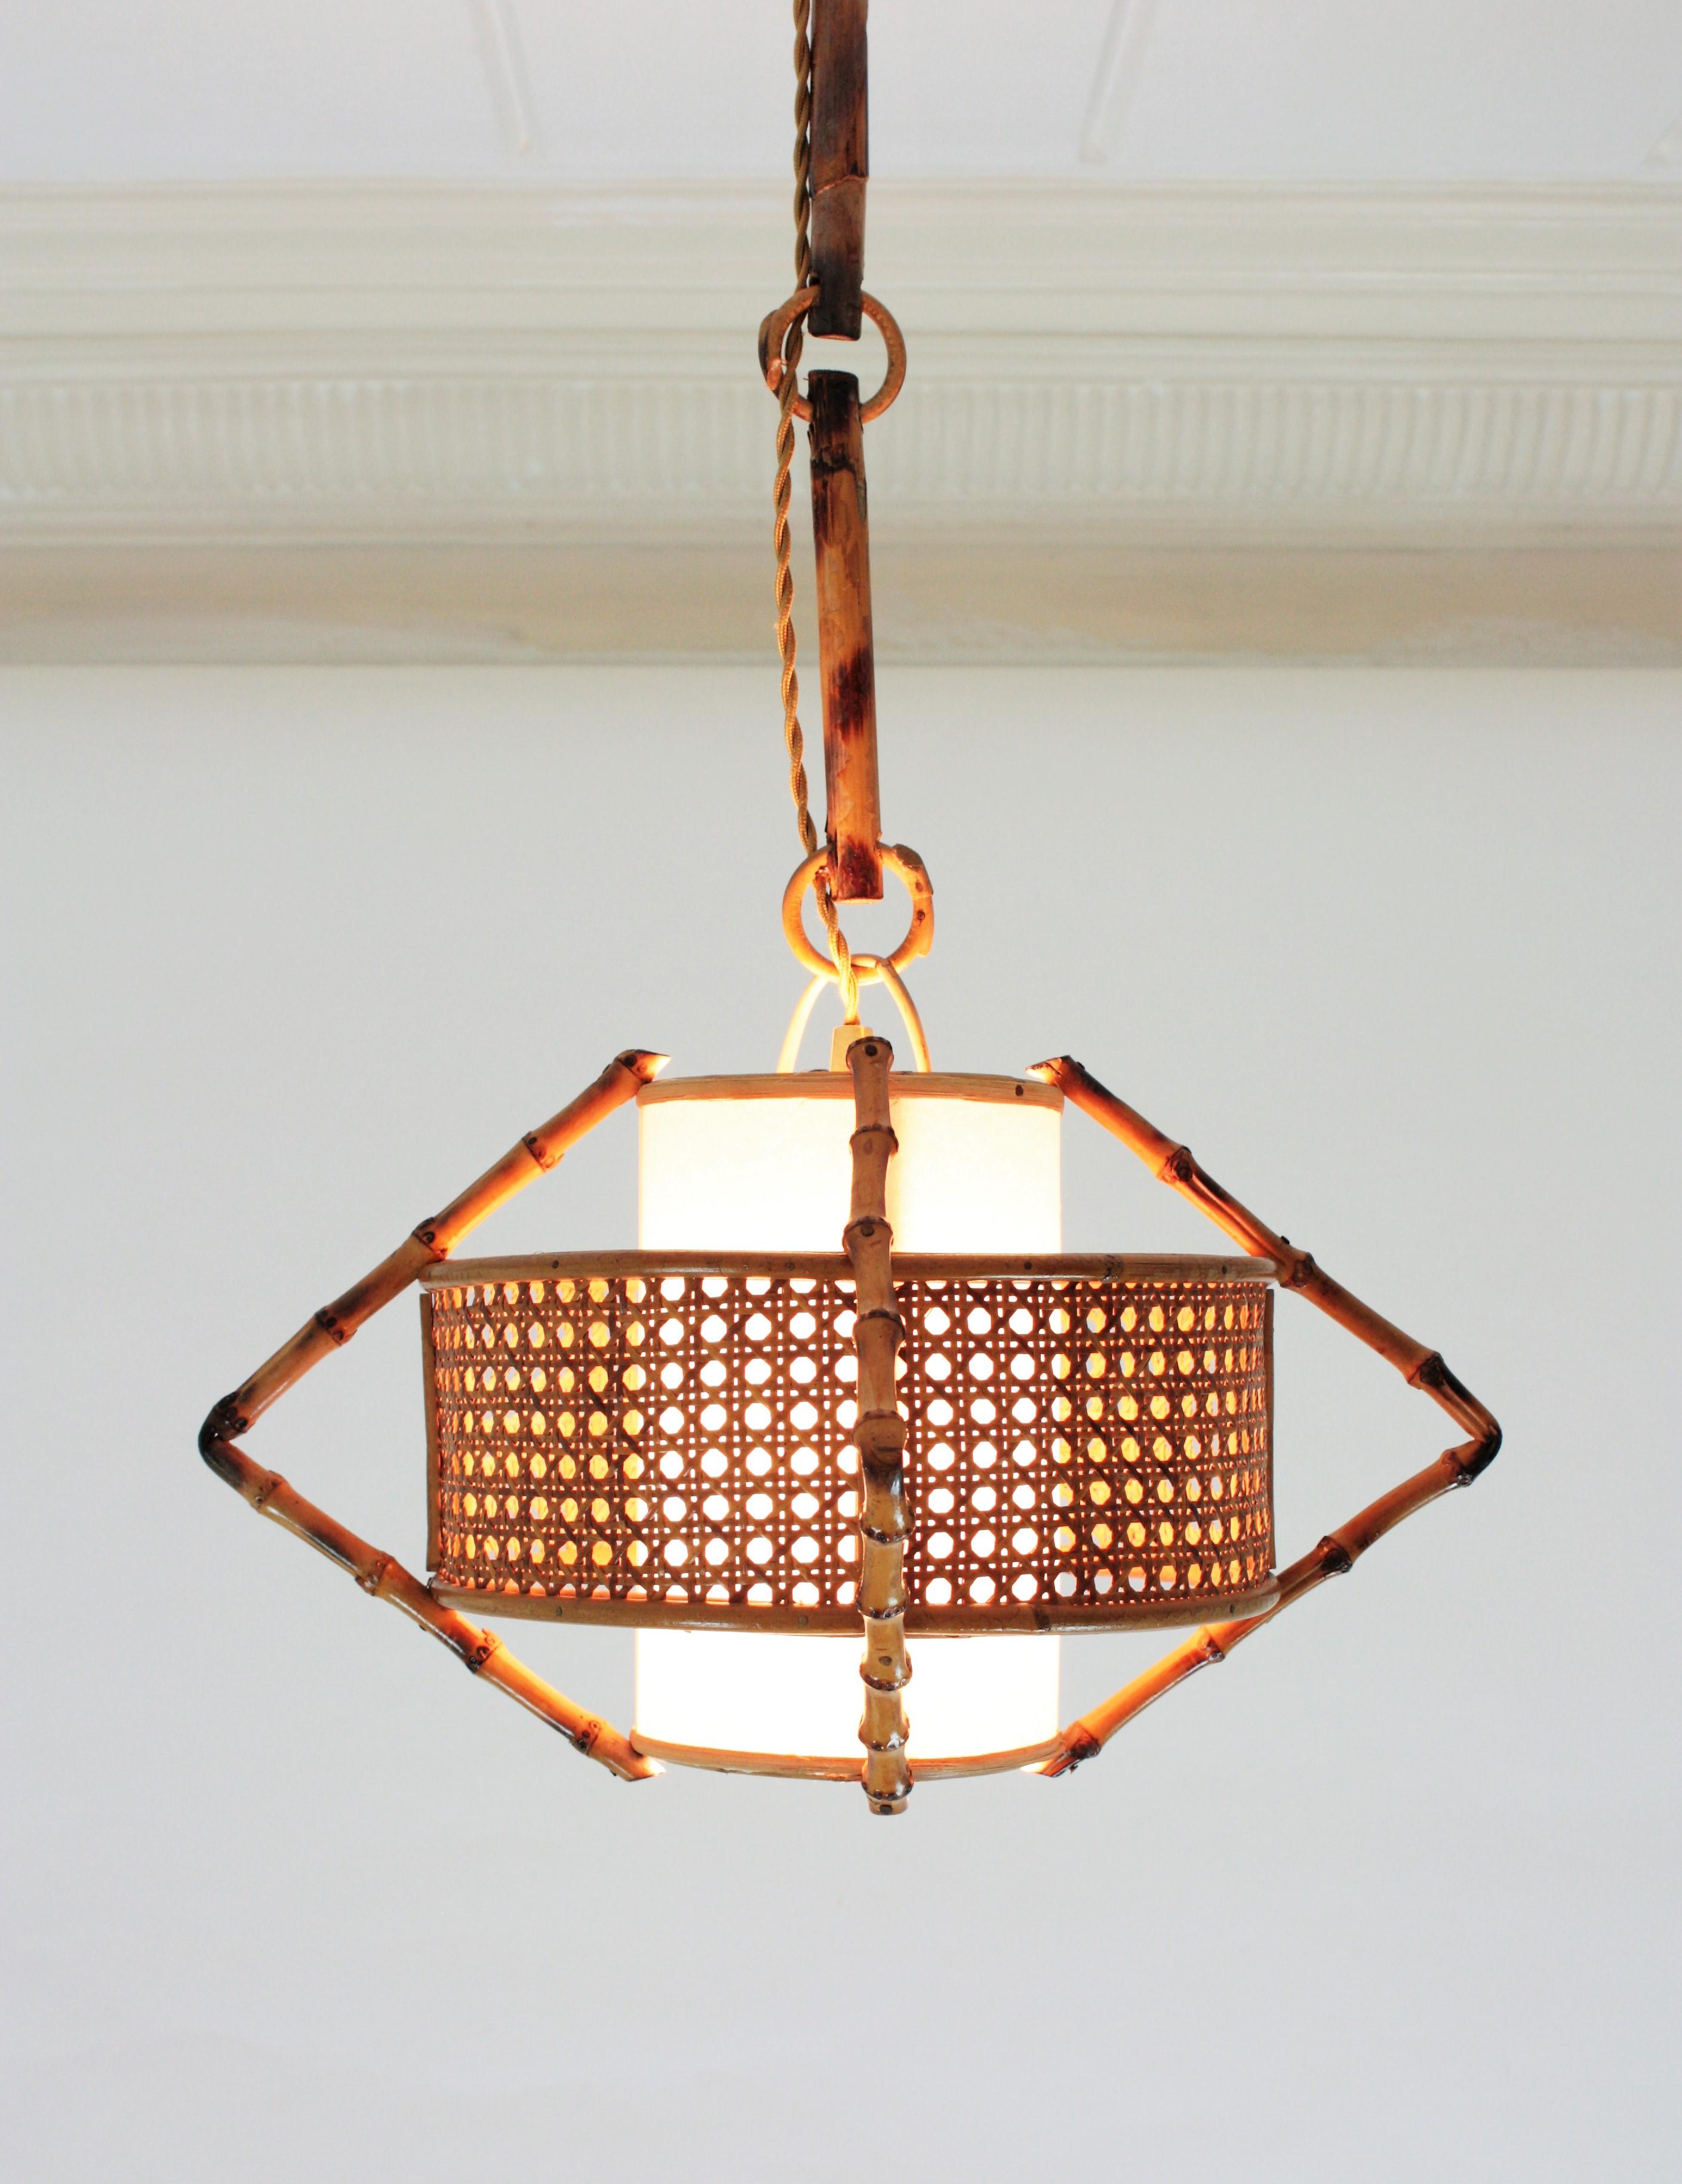 Hand-Crafted Spanish Modernist Bamboo Rattan and Wicker Pendant Lamp with Tiki Accents, 1950s